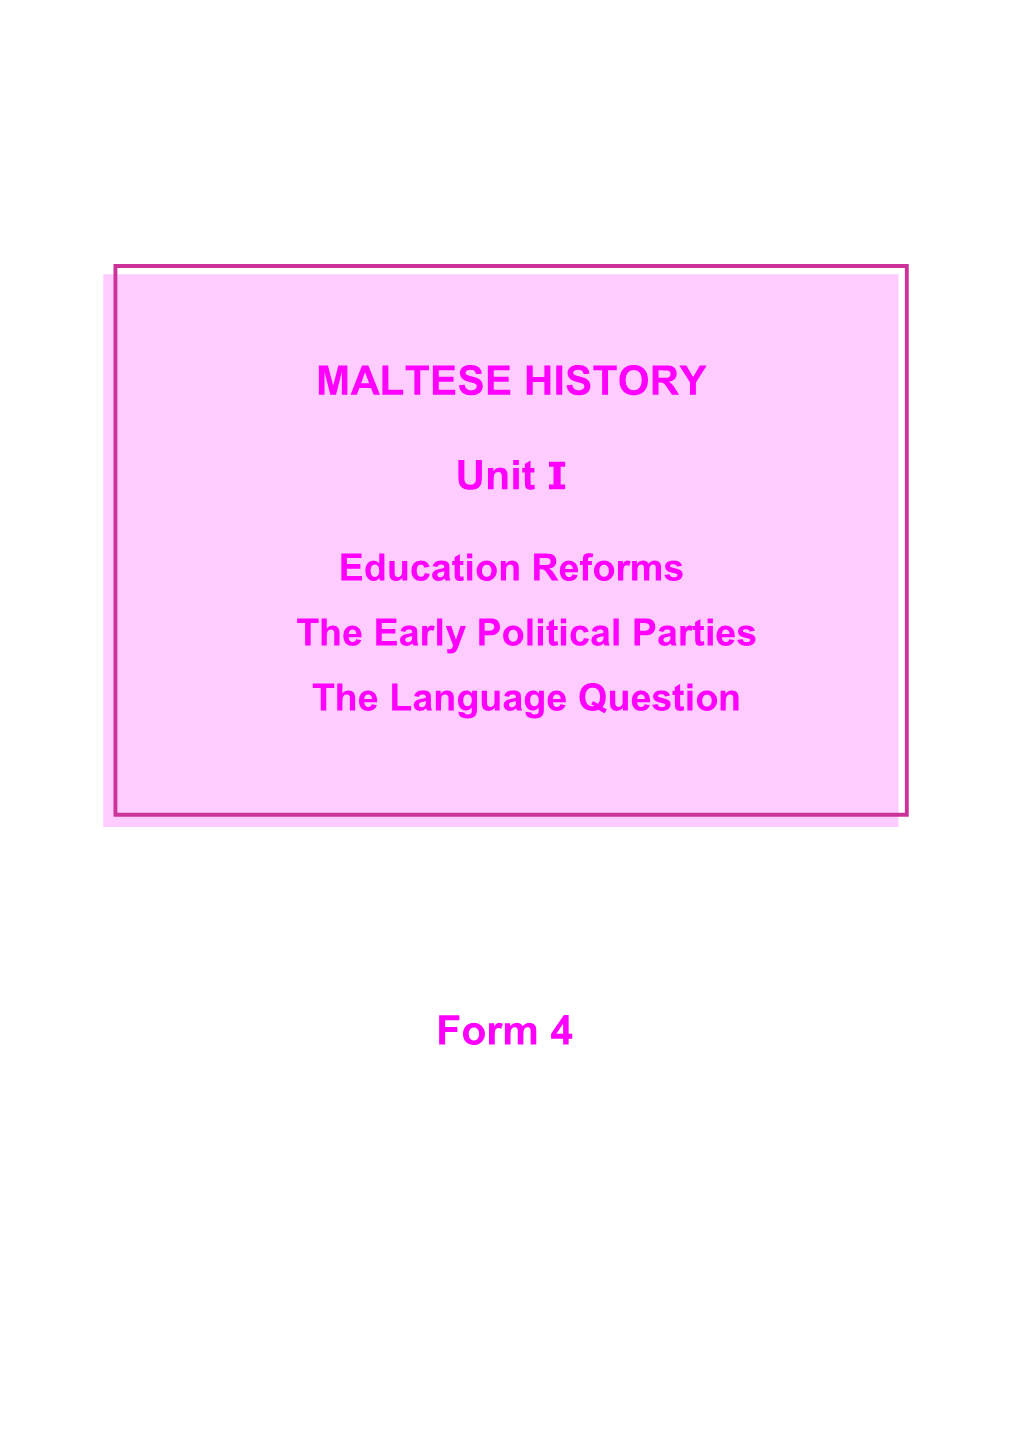 Education / Political Parties and the Language Question